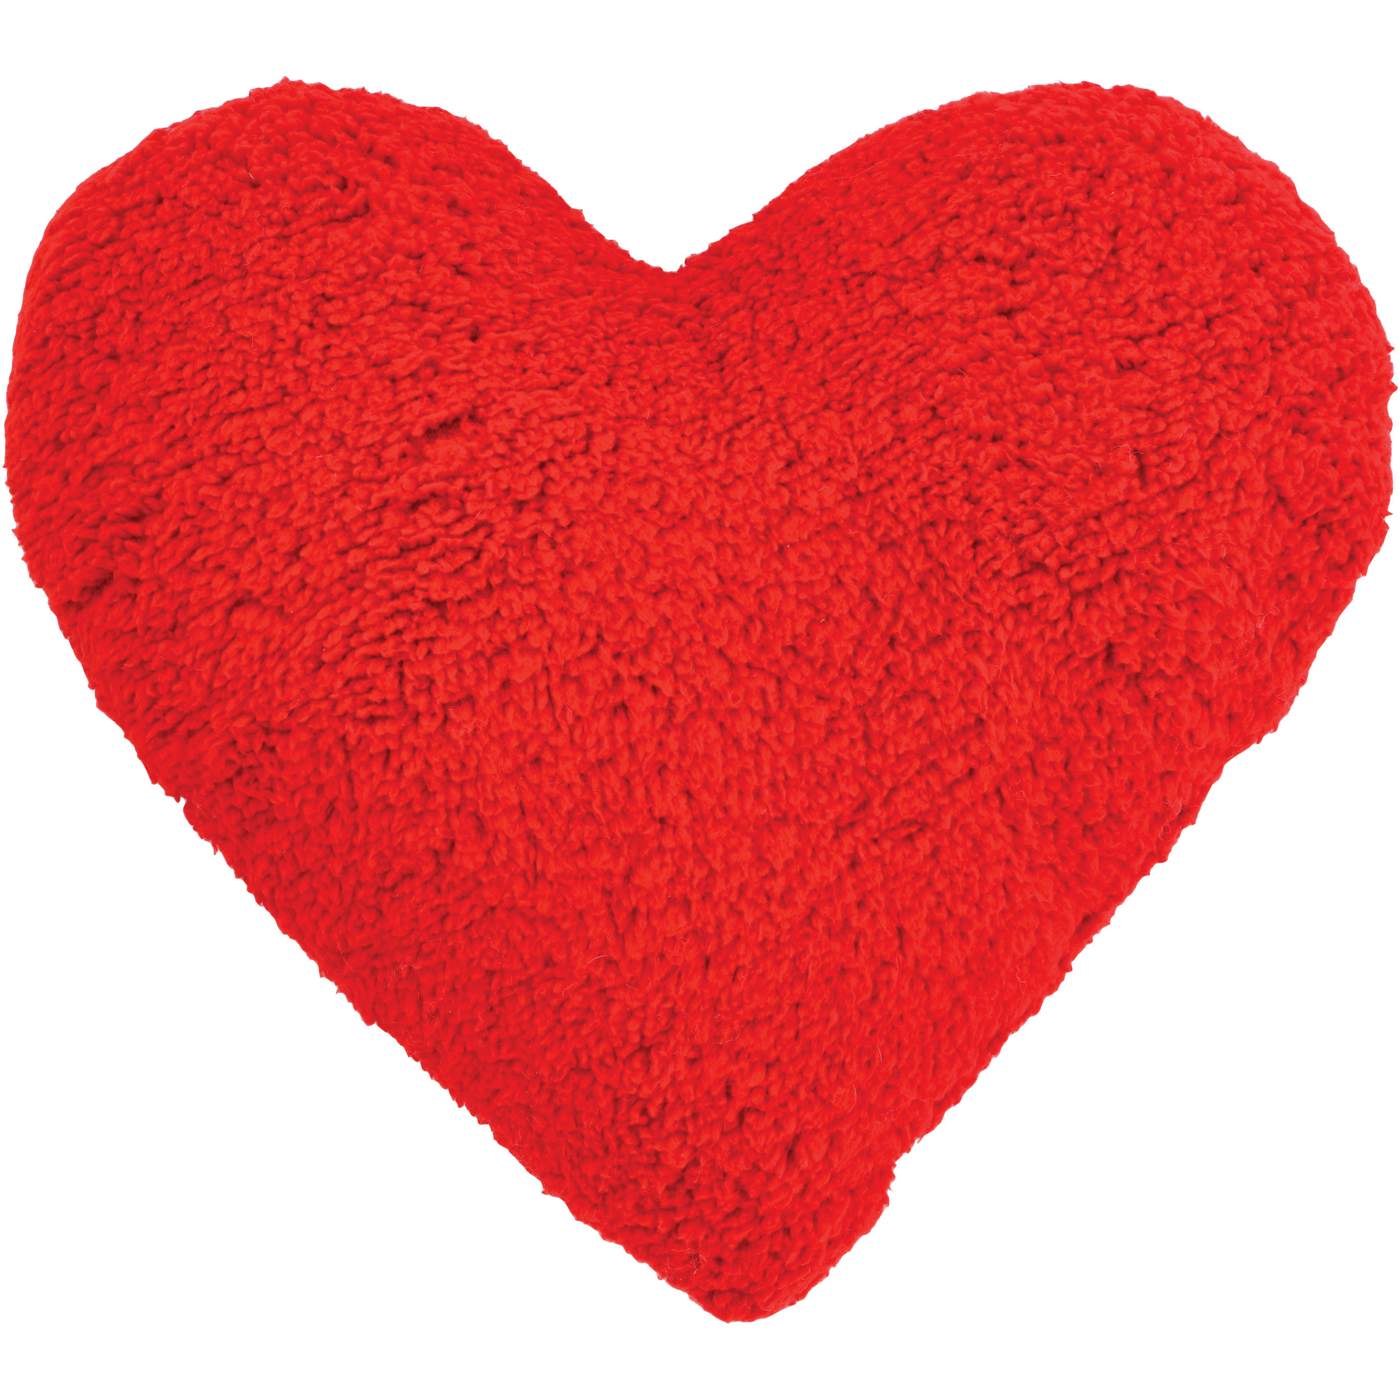 Destination Holiday Valentine's Day Sherpa Heart Pillow - Red; image 1 of 2